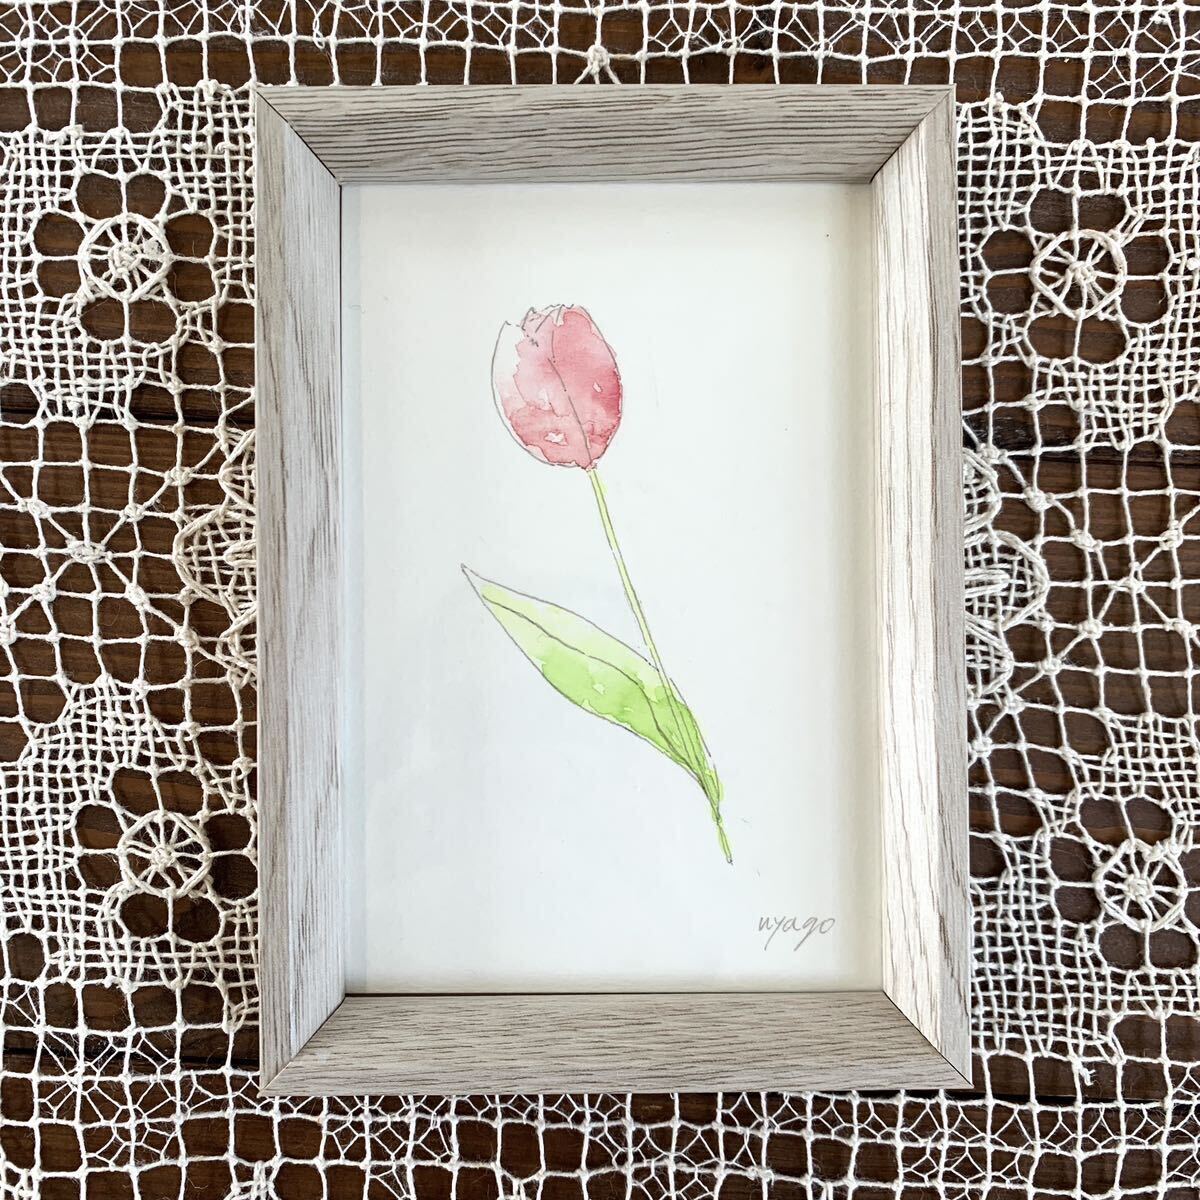 nyago watercolor painting tulip flower spring . picture illustration hand-drawn illustrations plant .botanika lure to art interior painter genuine work original picture autograph 